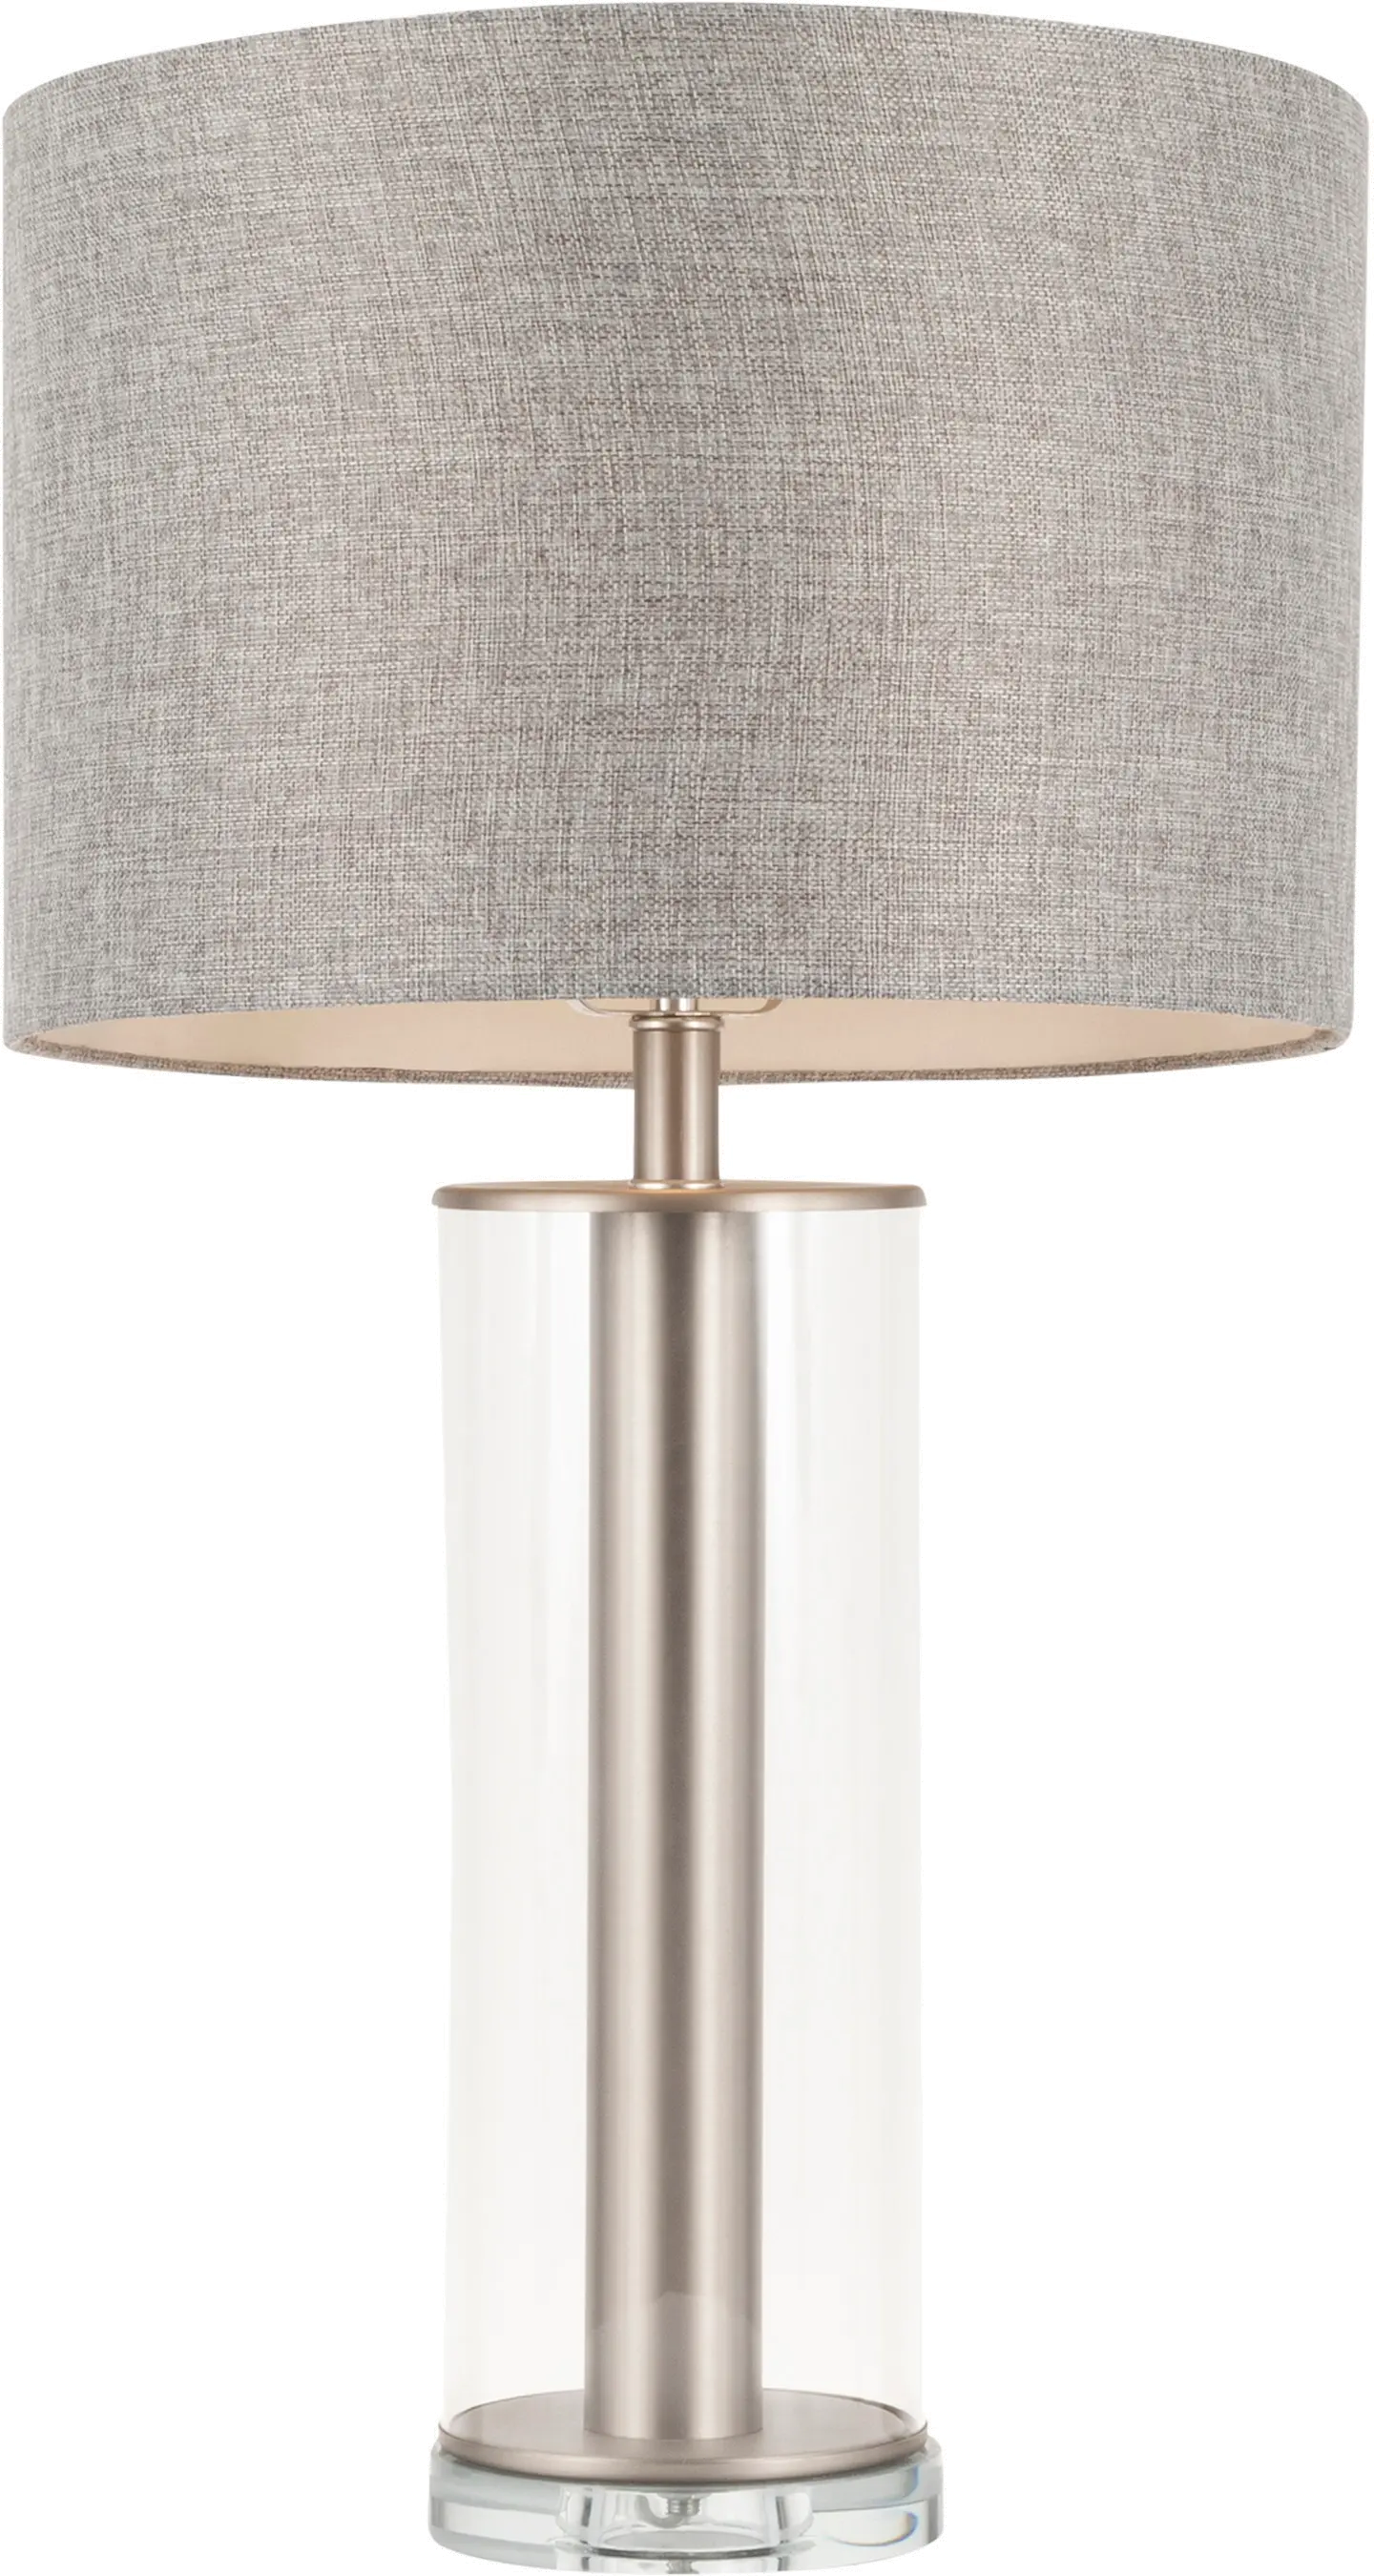 Photos - Chandelier / Lamp Lumisource Brushed Nickel Metal Table Lamp with Glass Base - Glacier LS-GL